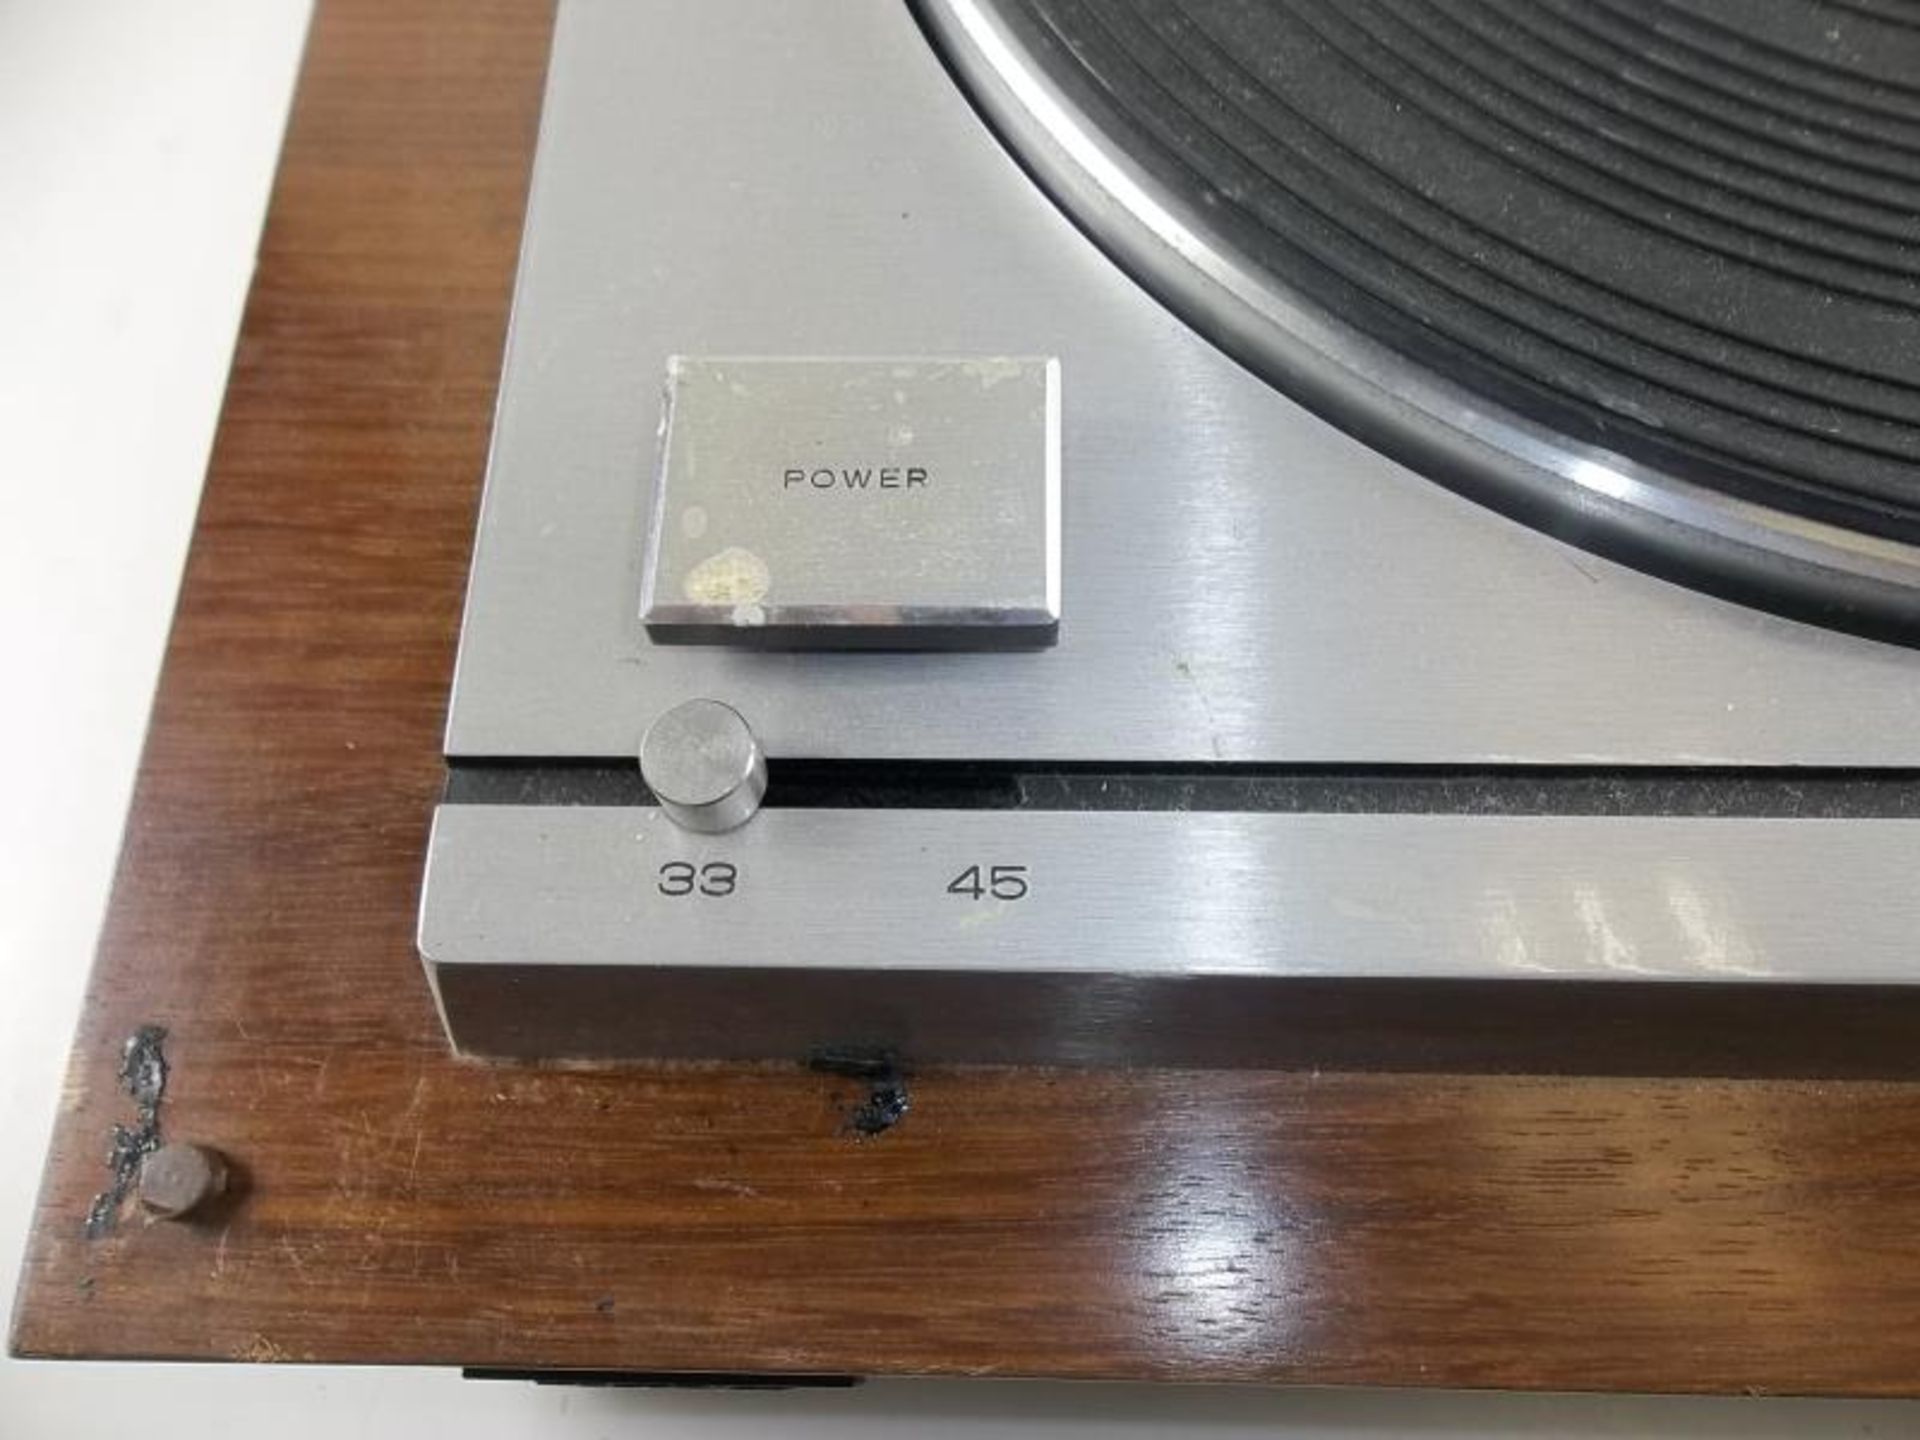 Technics by Panasonic turntable, 33, 45, with plastic dust cover, no arm, Model # SH10B1, s# 001079 - Image 4 of 6